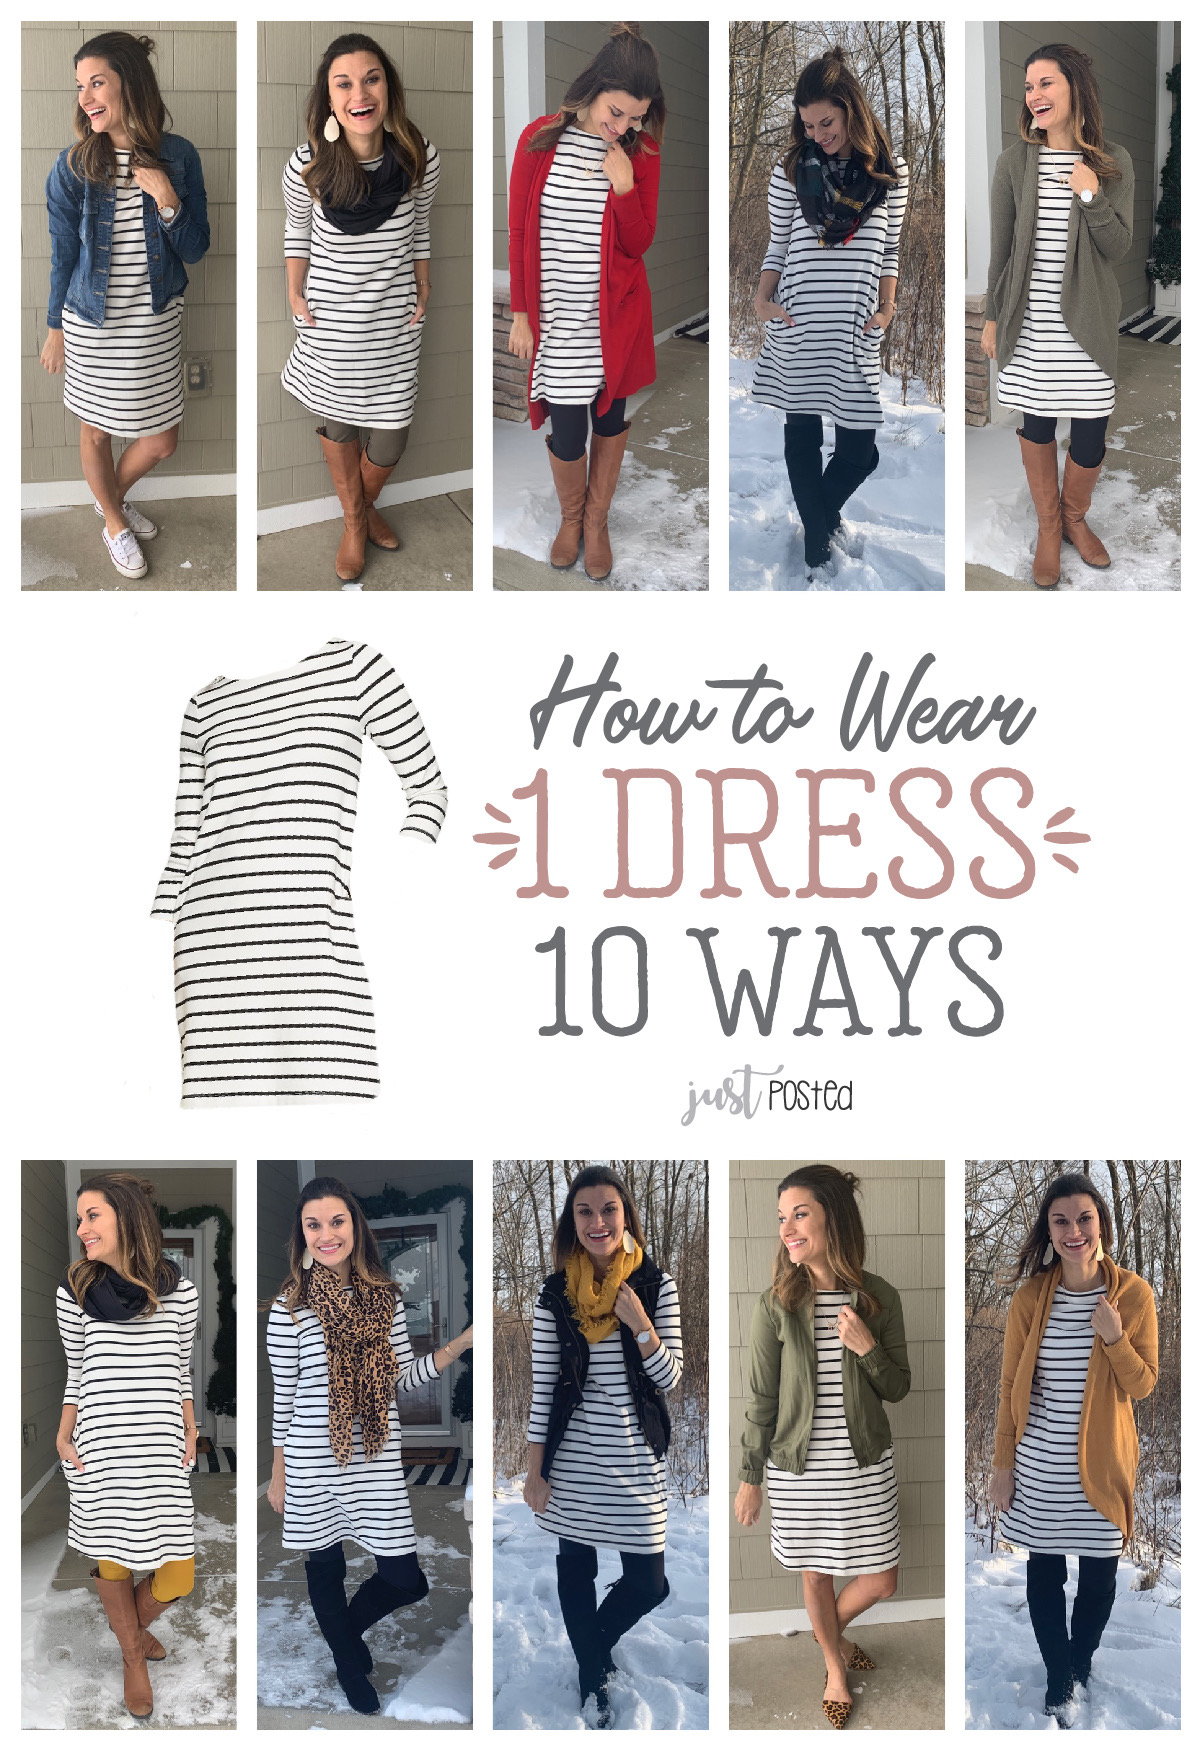 How to Wear – Page 7 – Just Posted